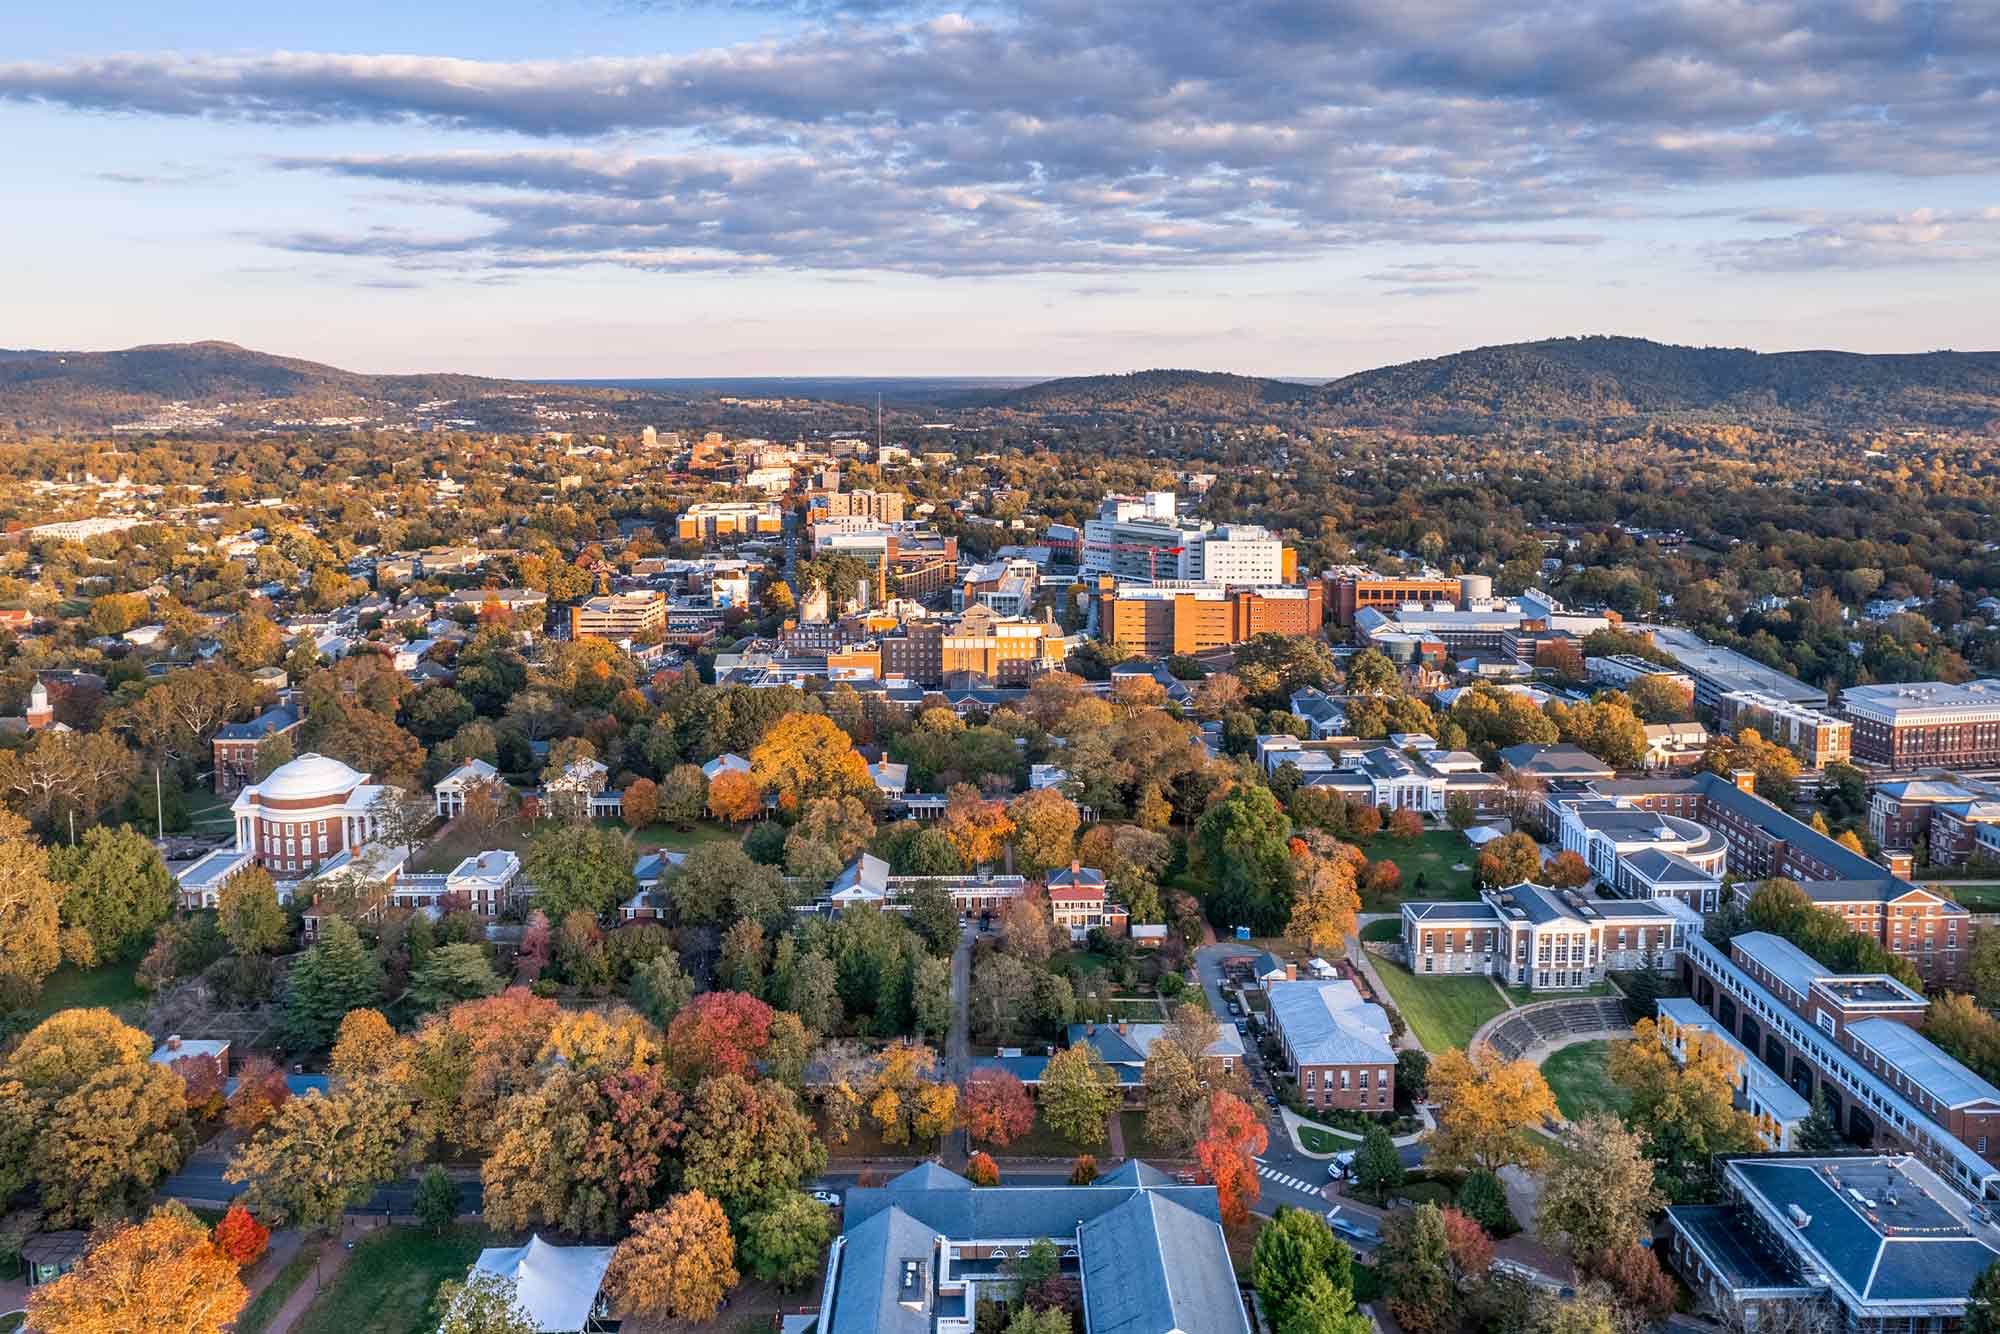 Birdshot view of UVA, autumn colored trees, and various buildings.